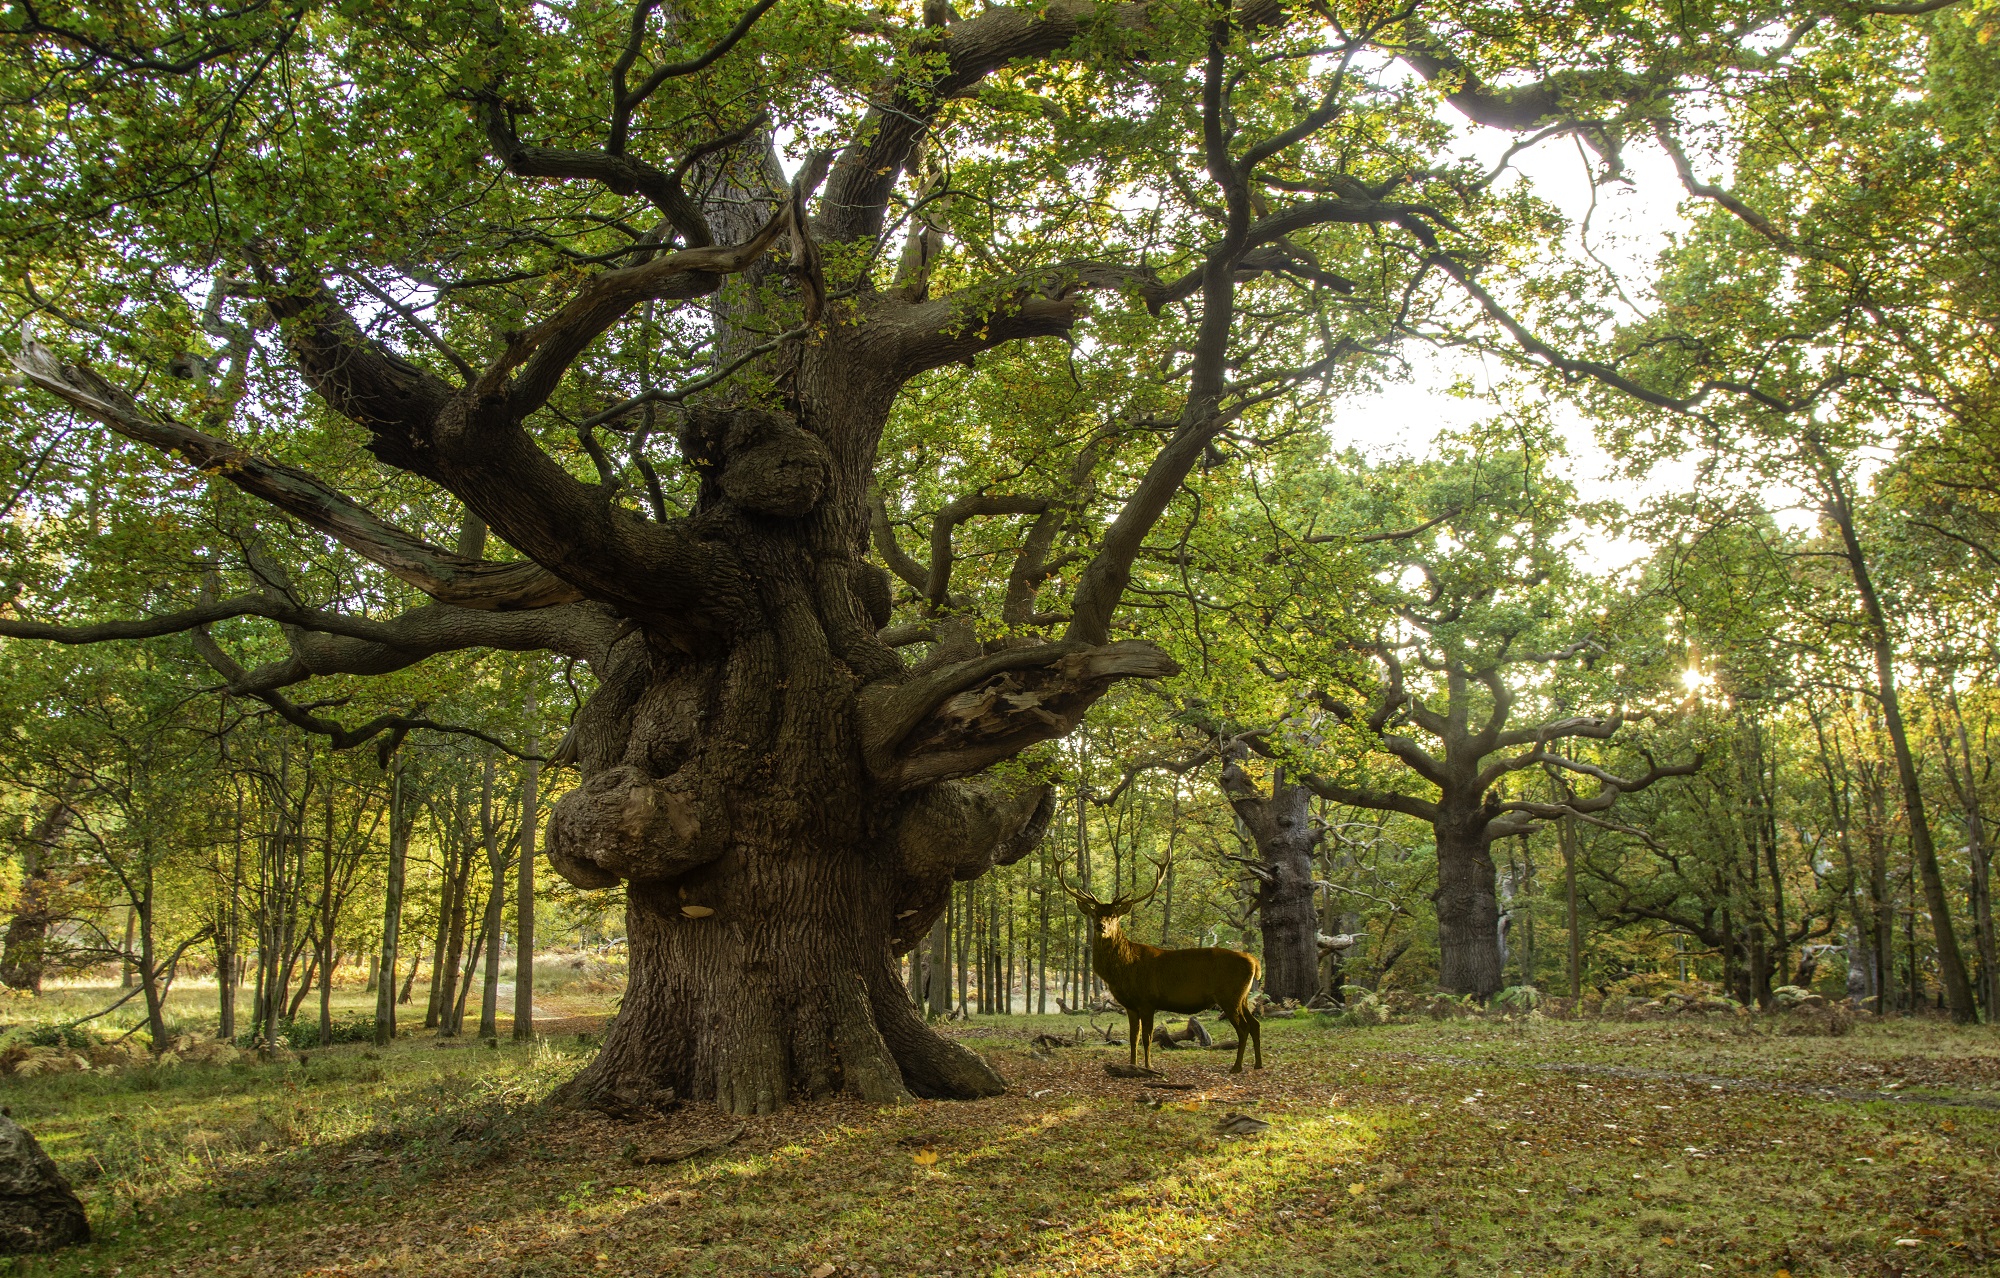 A stag stood next to a large tree within the woodland of Windsor Great Park.